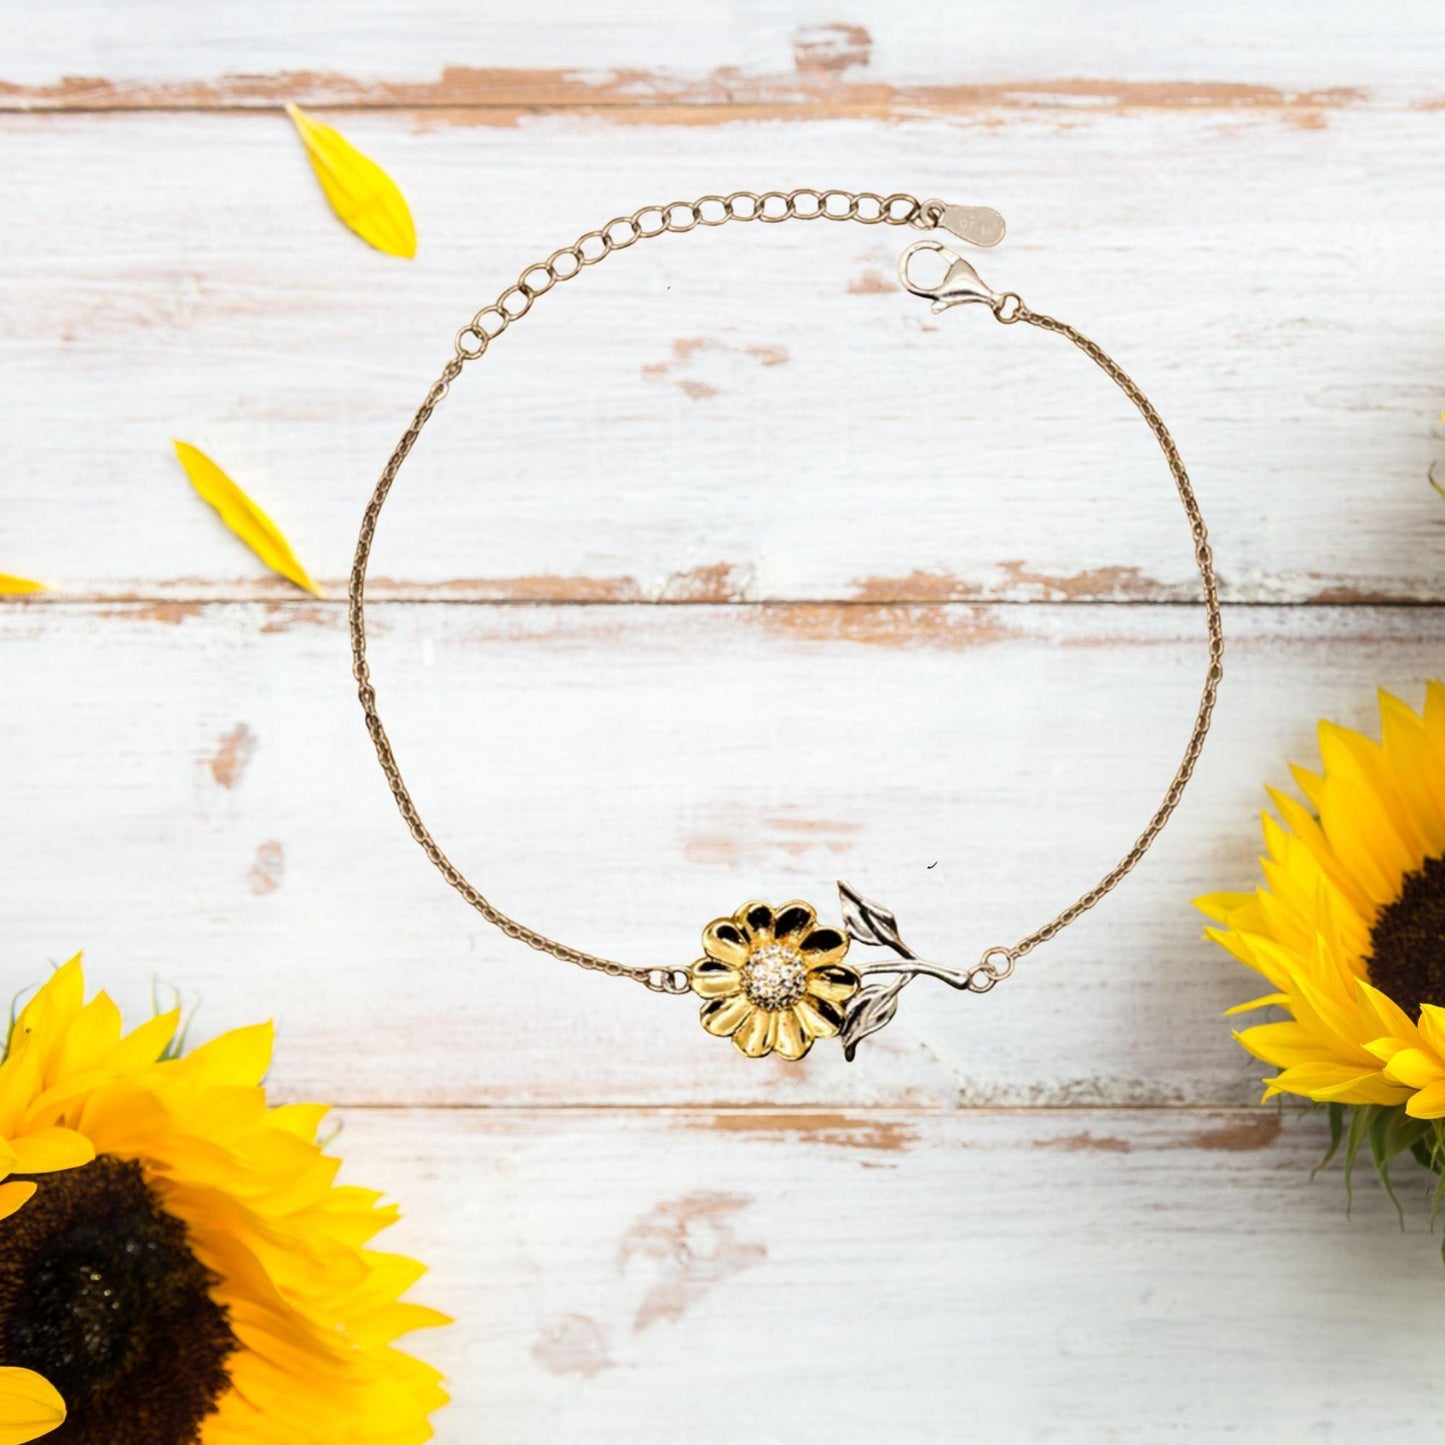 Electrical Engineer Sunflower Bracelet - Thanks for being who you are - Birthday Christmas Jewelry Gifts Coworkers Colleague Boss - Mallard Moon Gift Shop